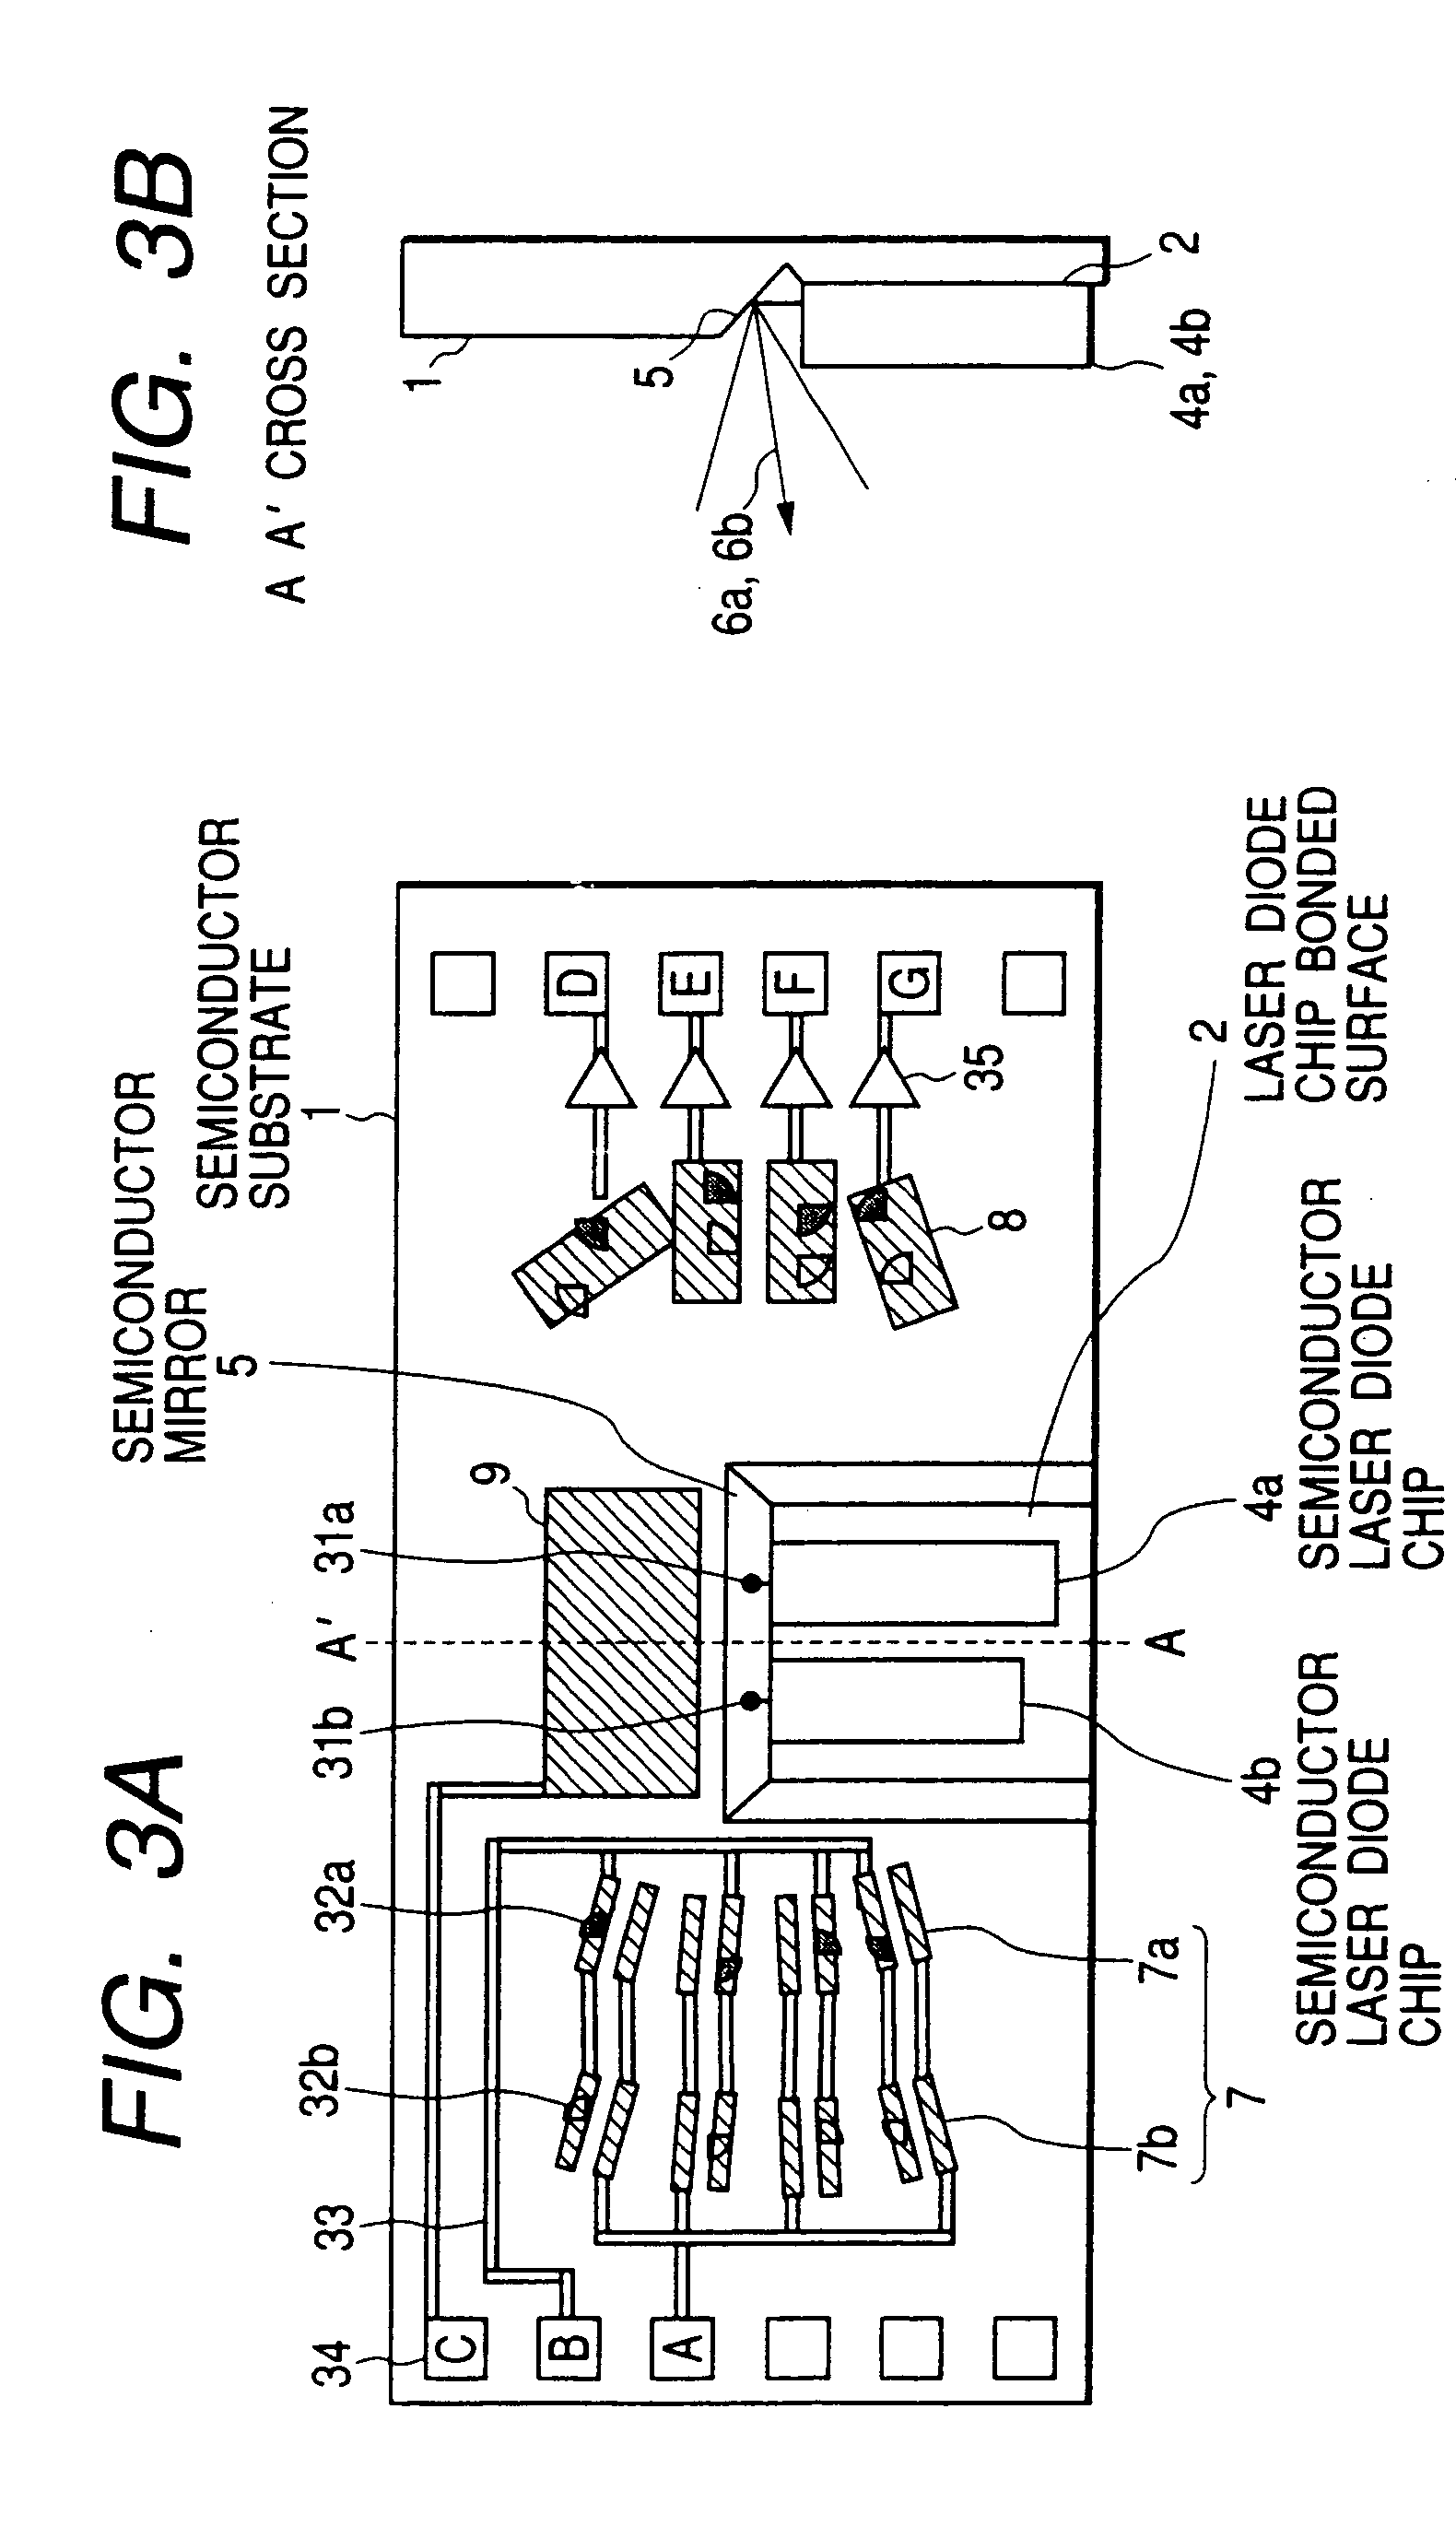 Optical head with lasers and mirrors in a recess formed in a substrate